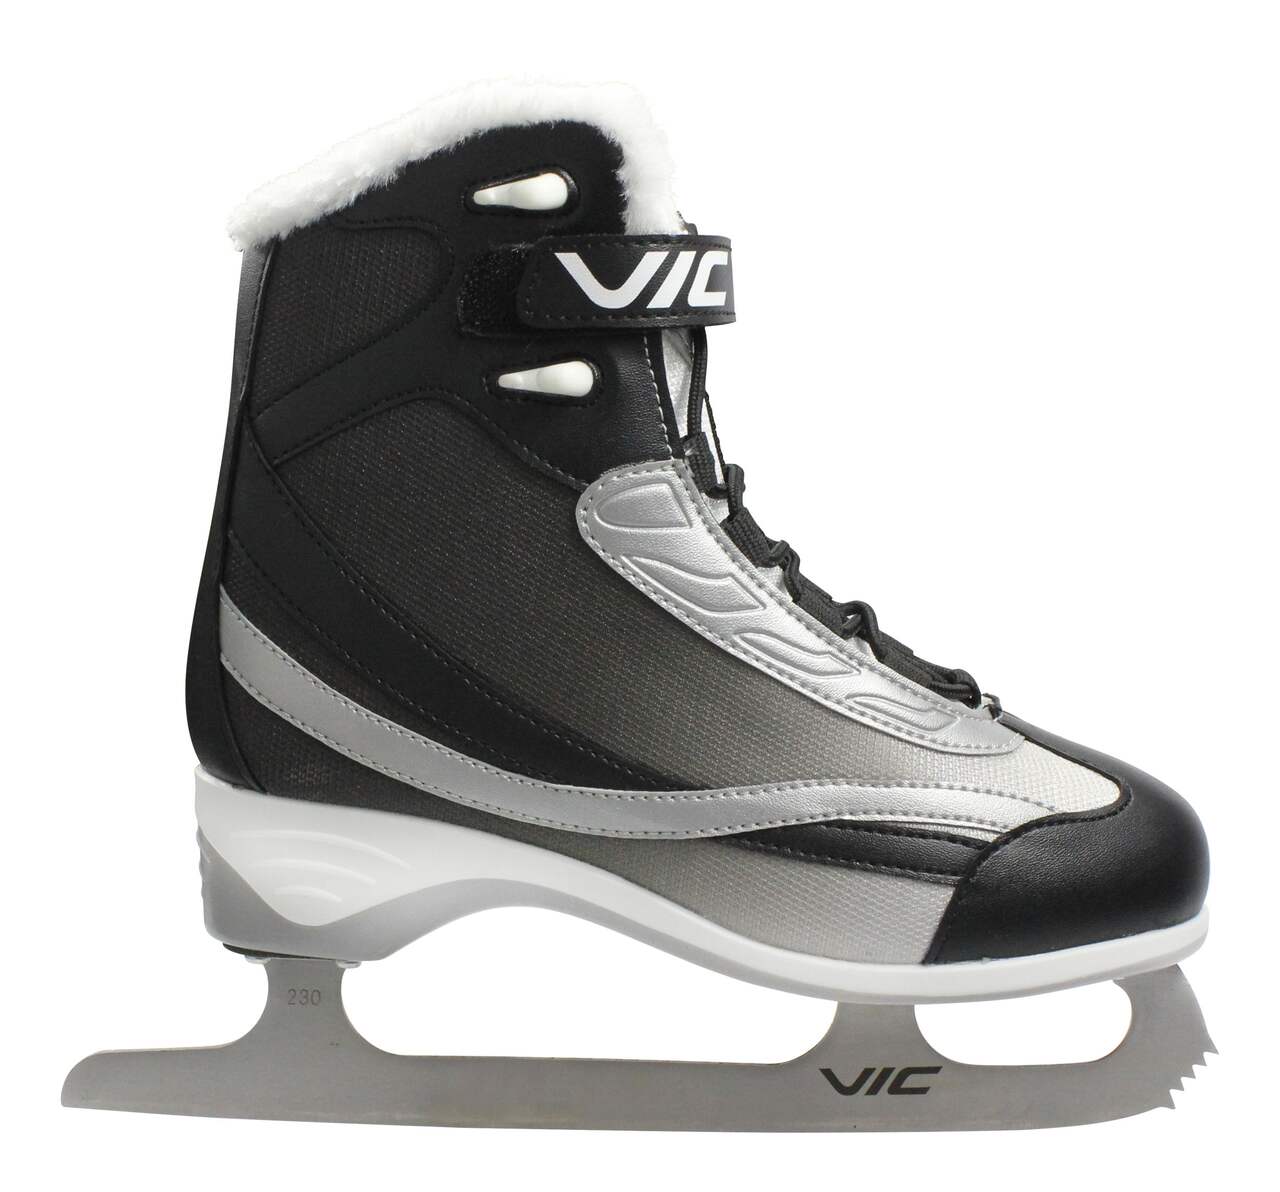 VIC Motion Recreational Ice Skates, Women, Black/Silver, Assorted Sizes